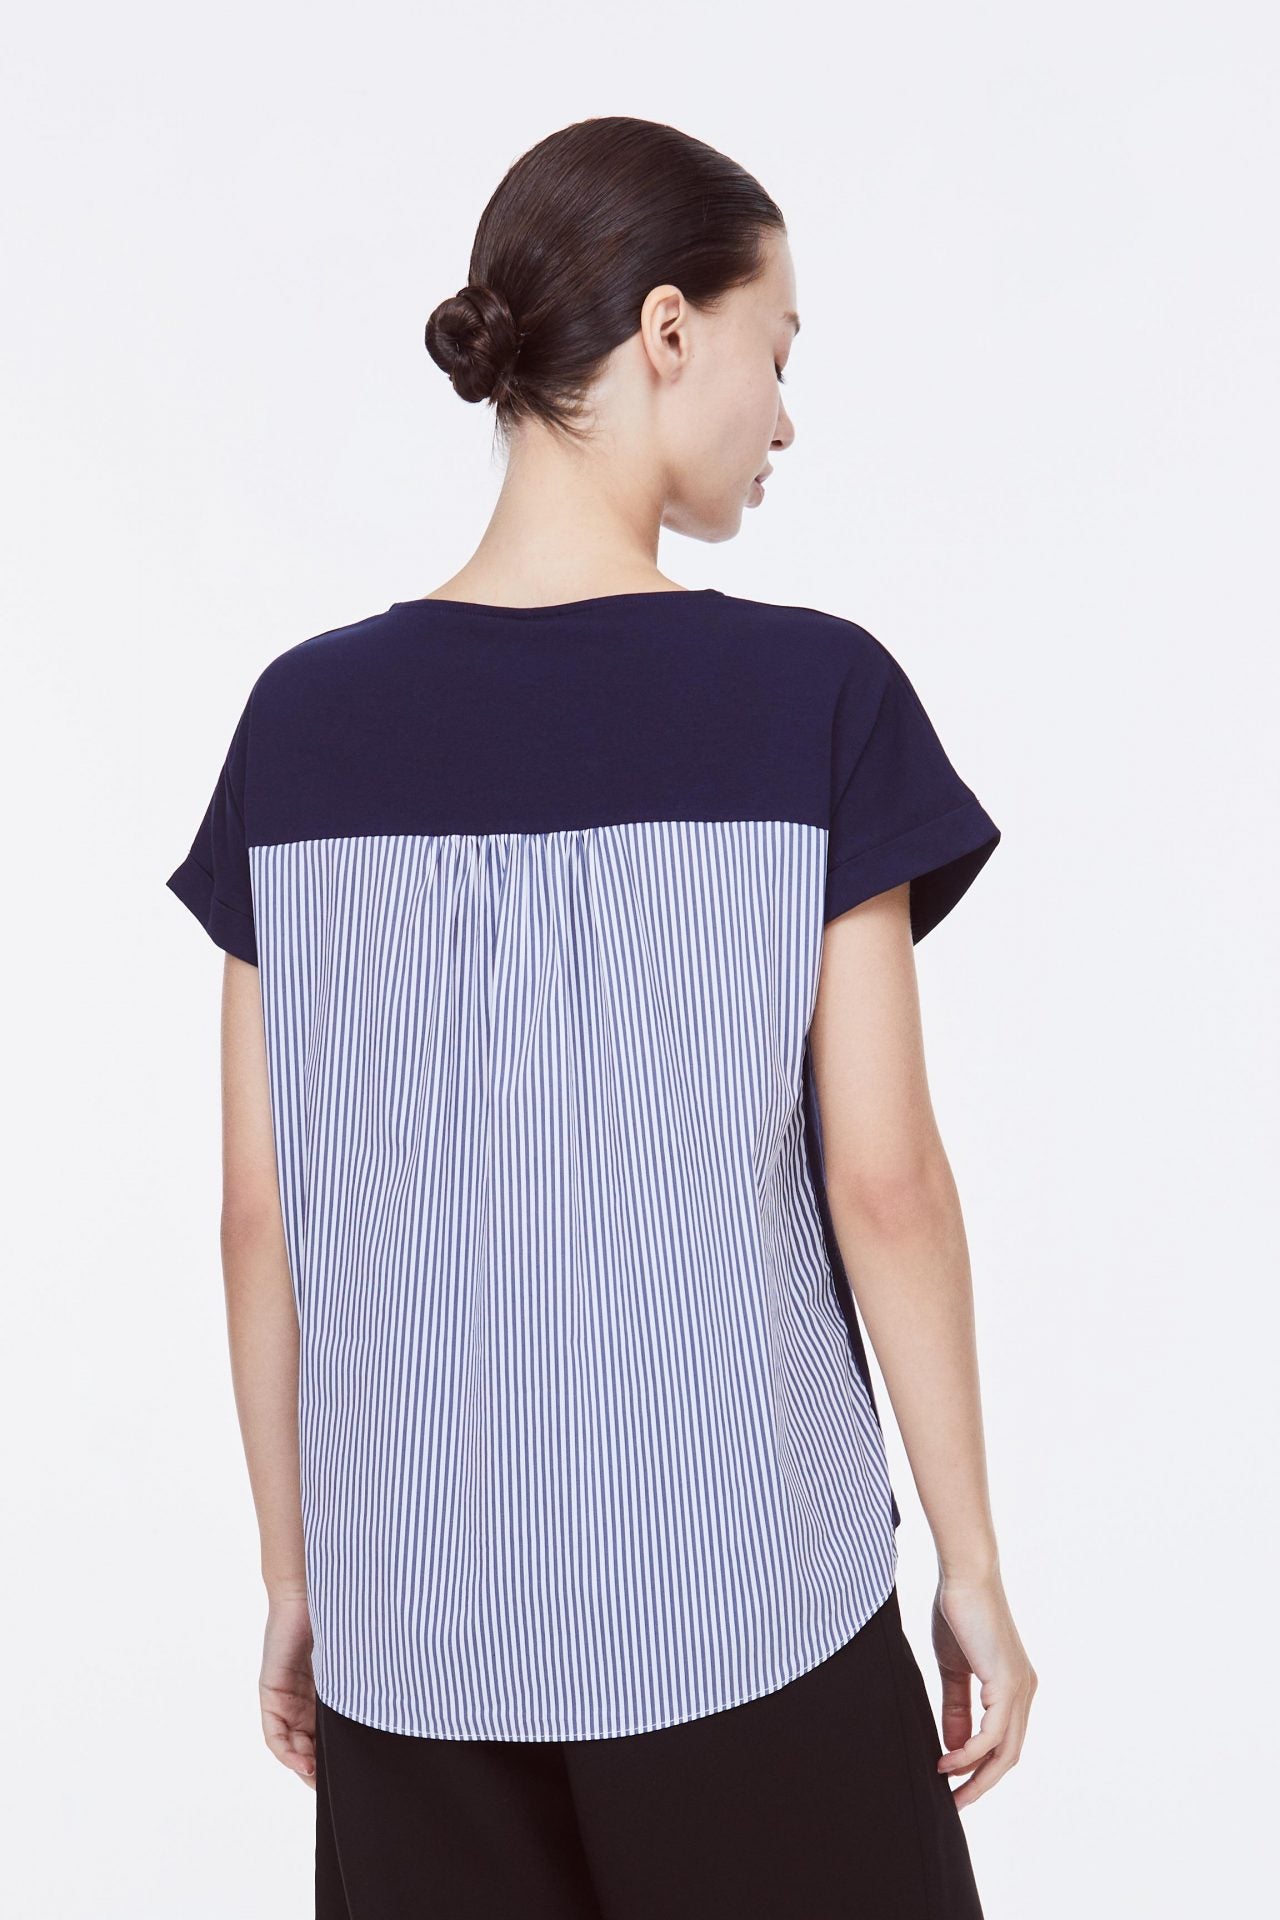 AT 10963 ROUND NECK TOP NAVY BACK